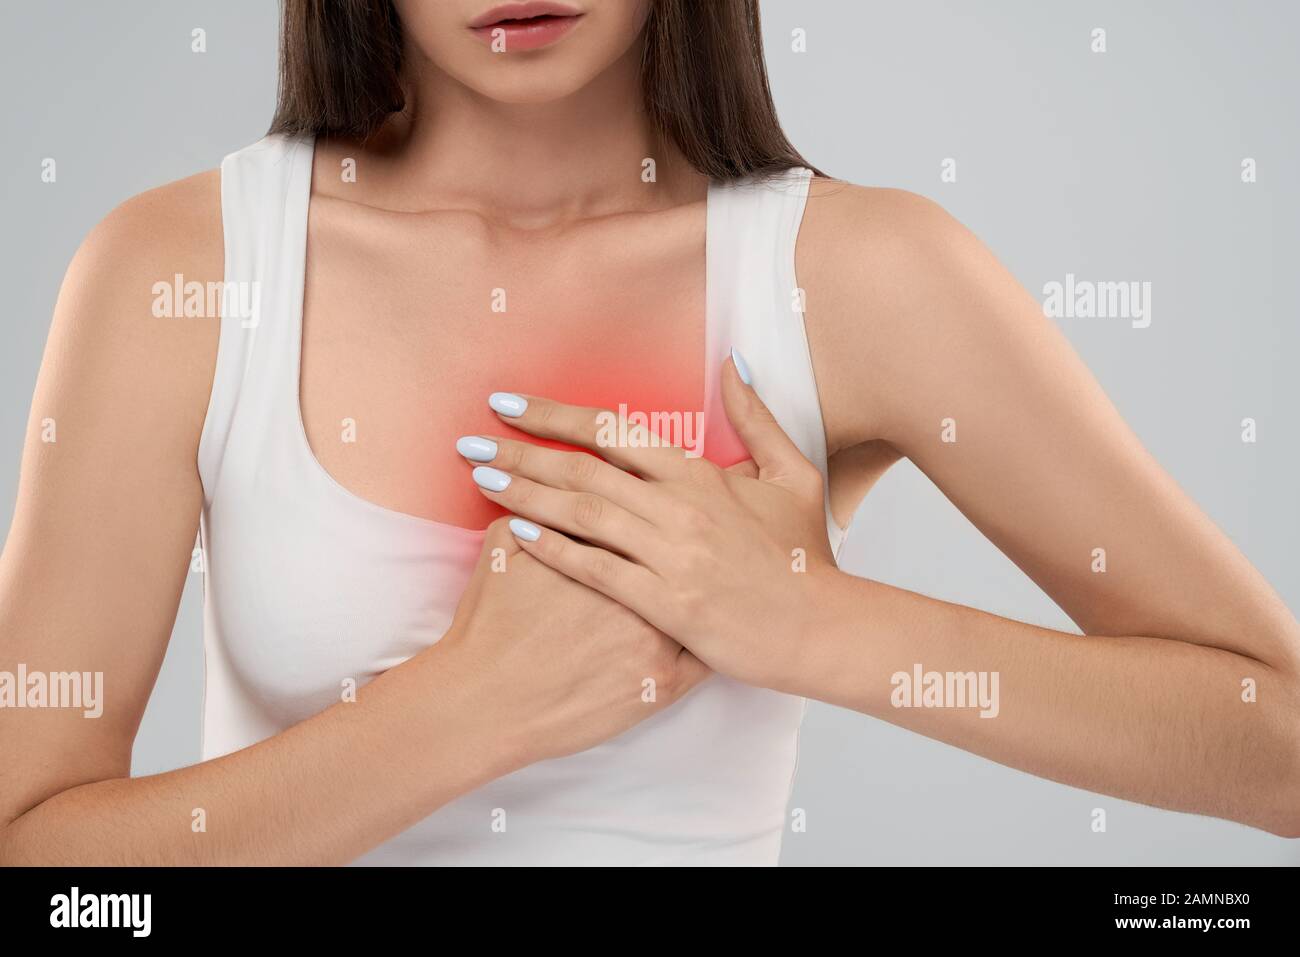 Woman touching upper chest - Stock Image - F021/2325 - Science Photo Library